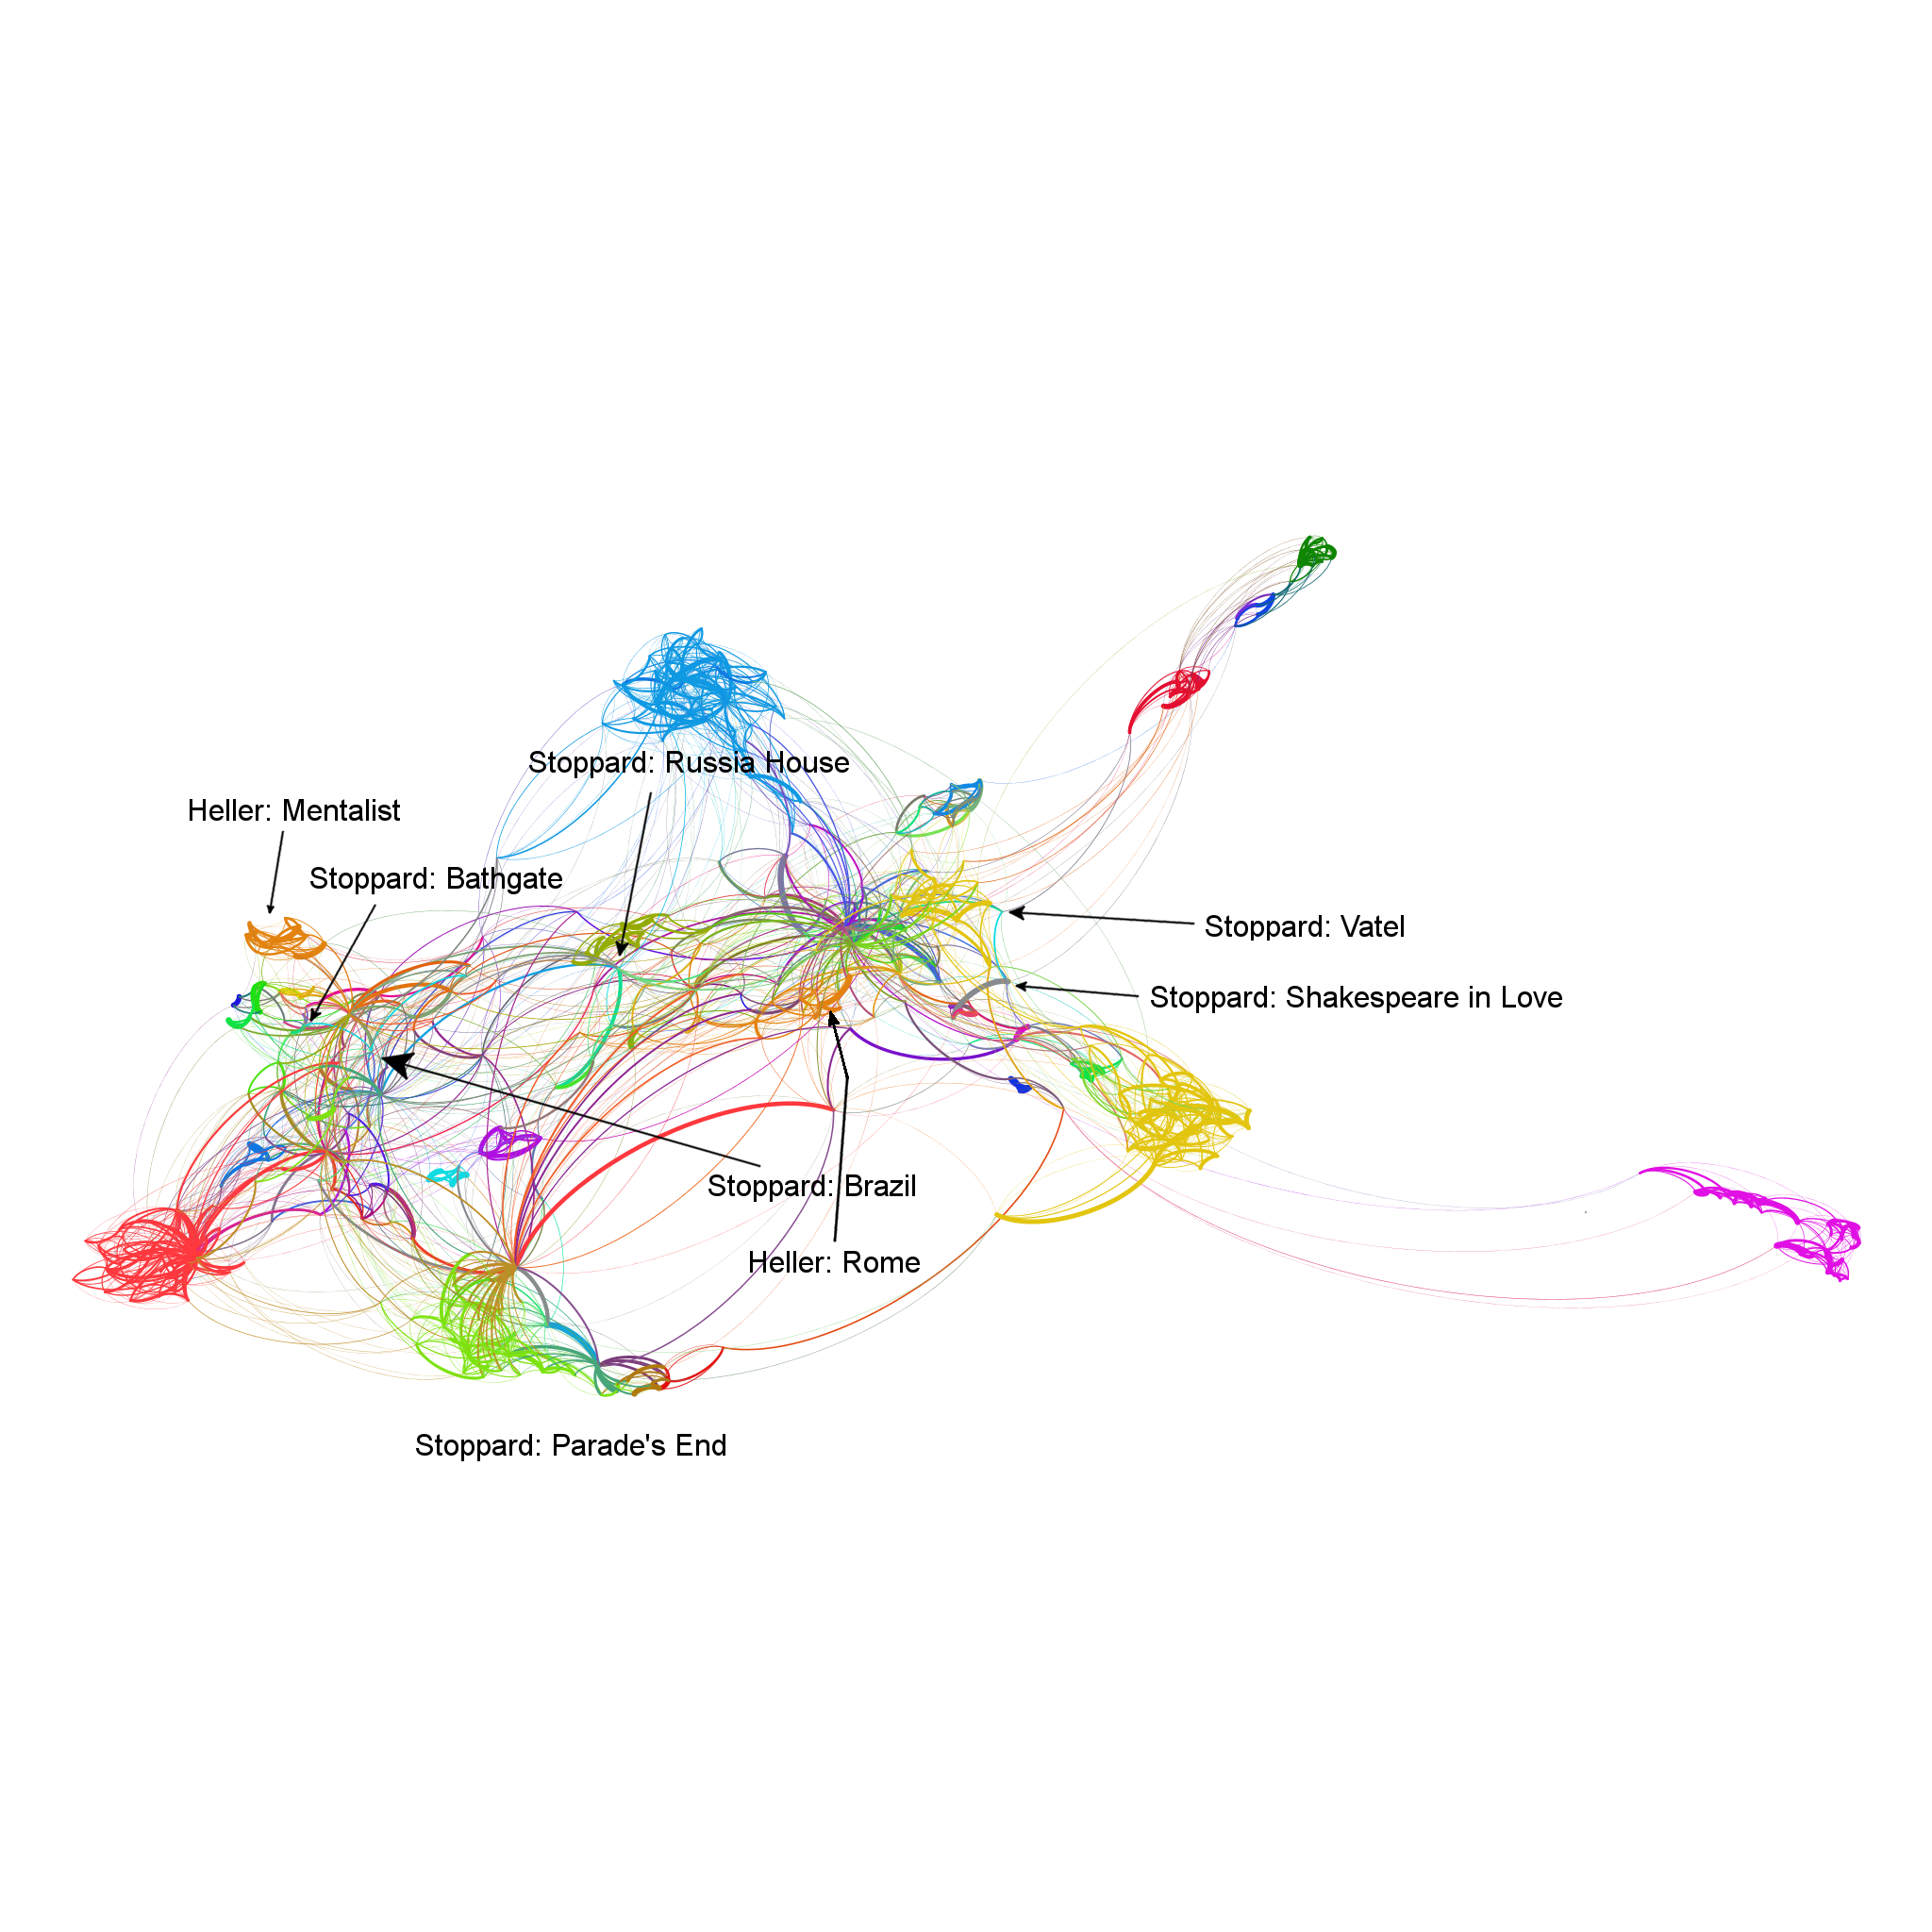 Figure 1. Network analysis diagram of historical and non-historical scripts.